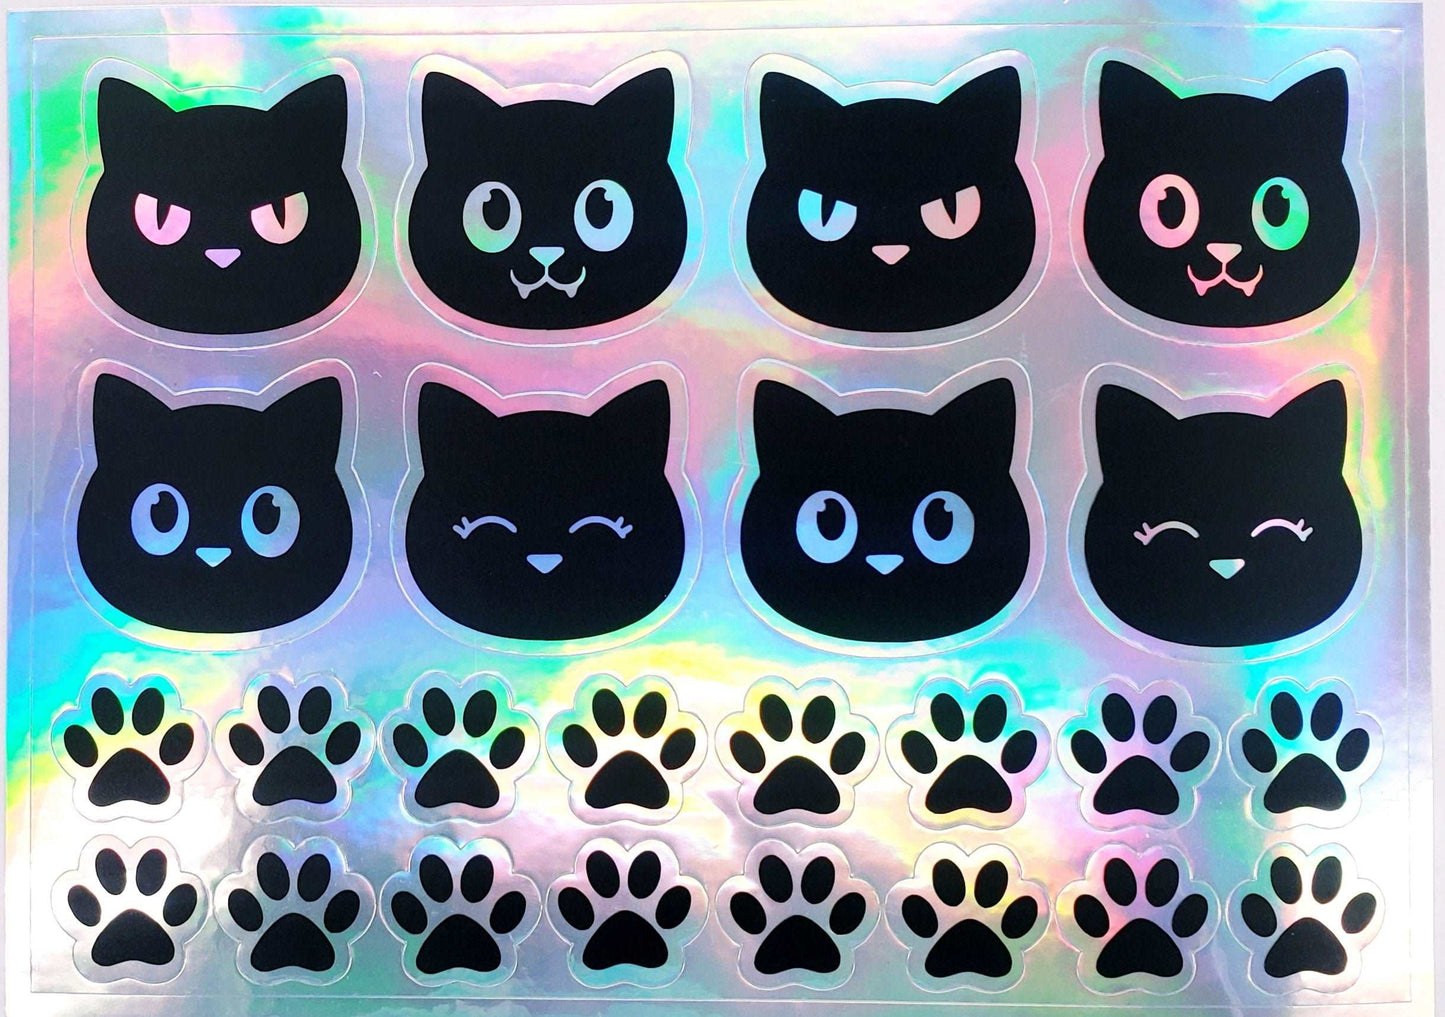 Cute Cat Sticker Sheet, black and silver holographic stickers of cats and pawprints